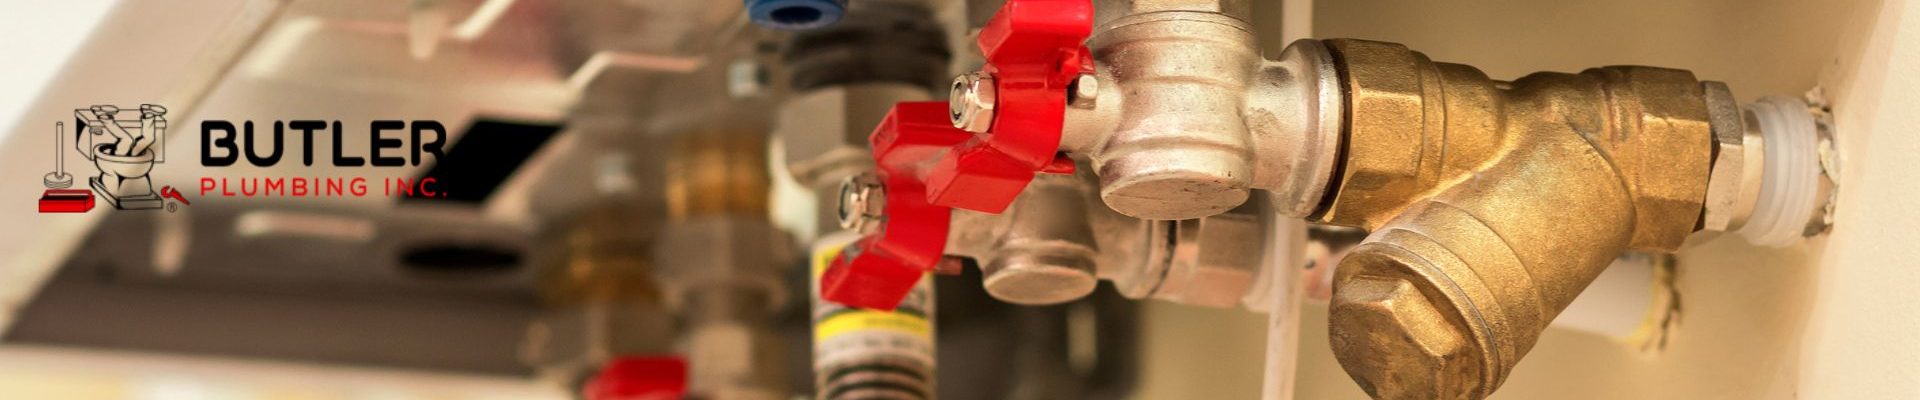 Gas Plumbing Regulations: What You Need To Know